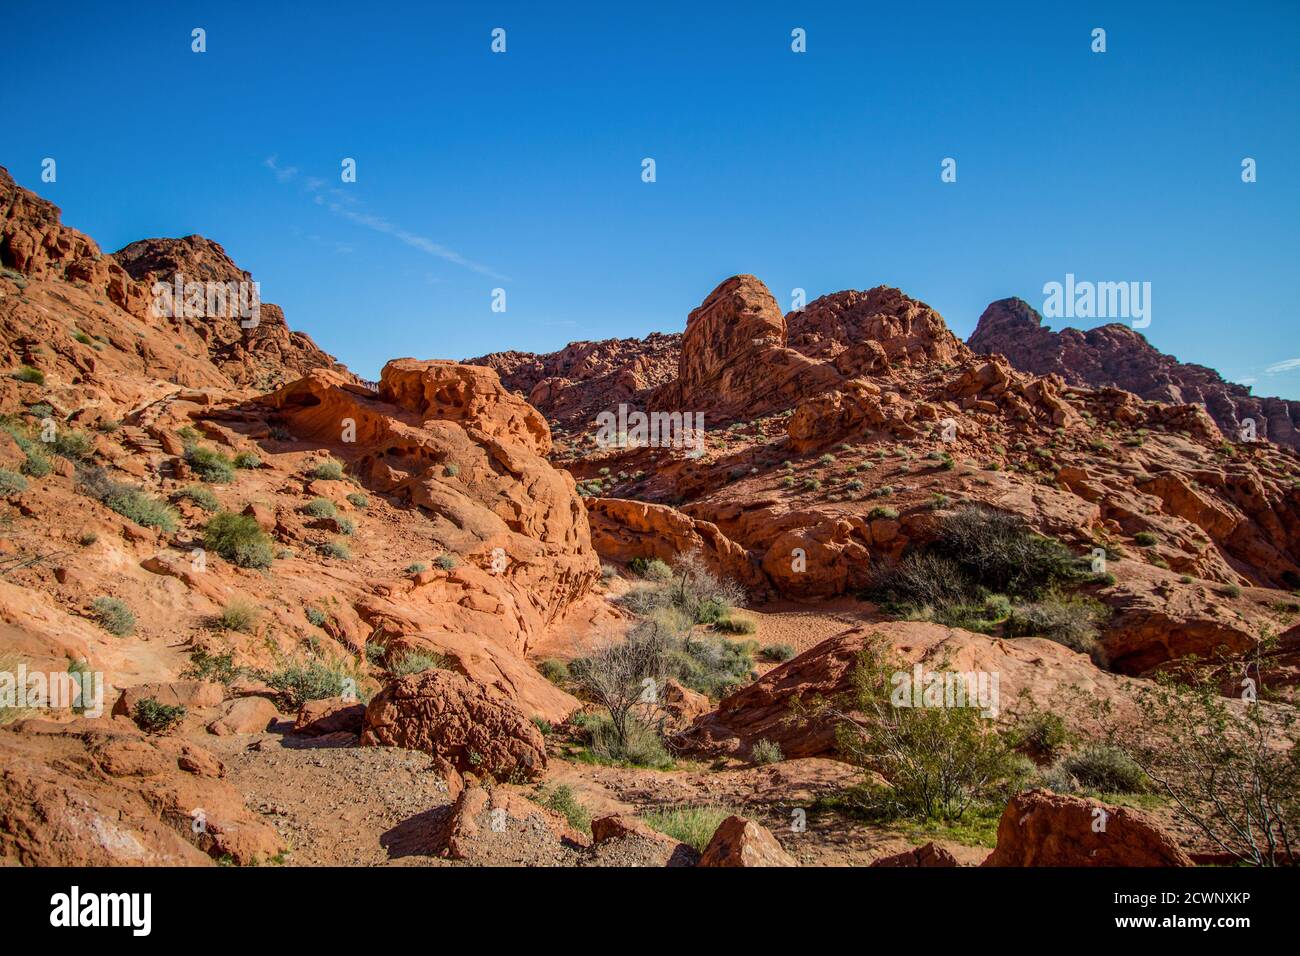 Valley of Fire. Red rock mountains and cliffs in the desert of Nevada at Valley of Fire State Park. Stock Photo